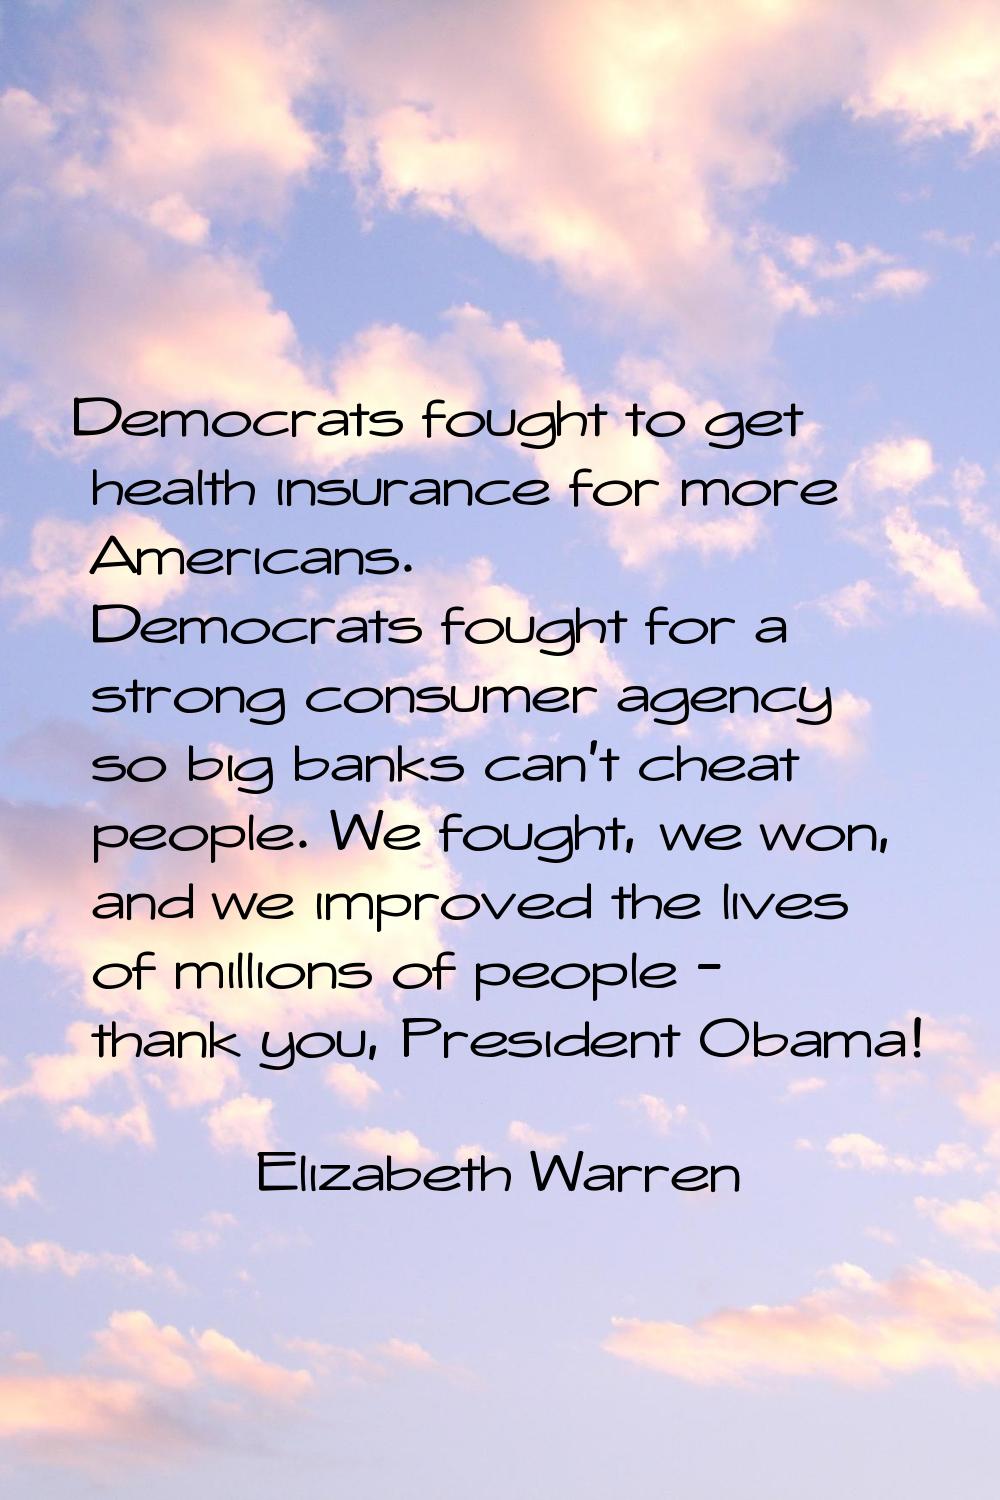 Democrats fought to get health insurance for more Americans. Democrats fought for a strong consumer